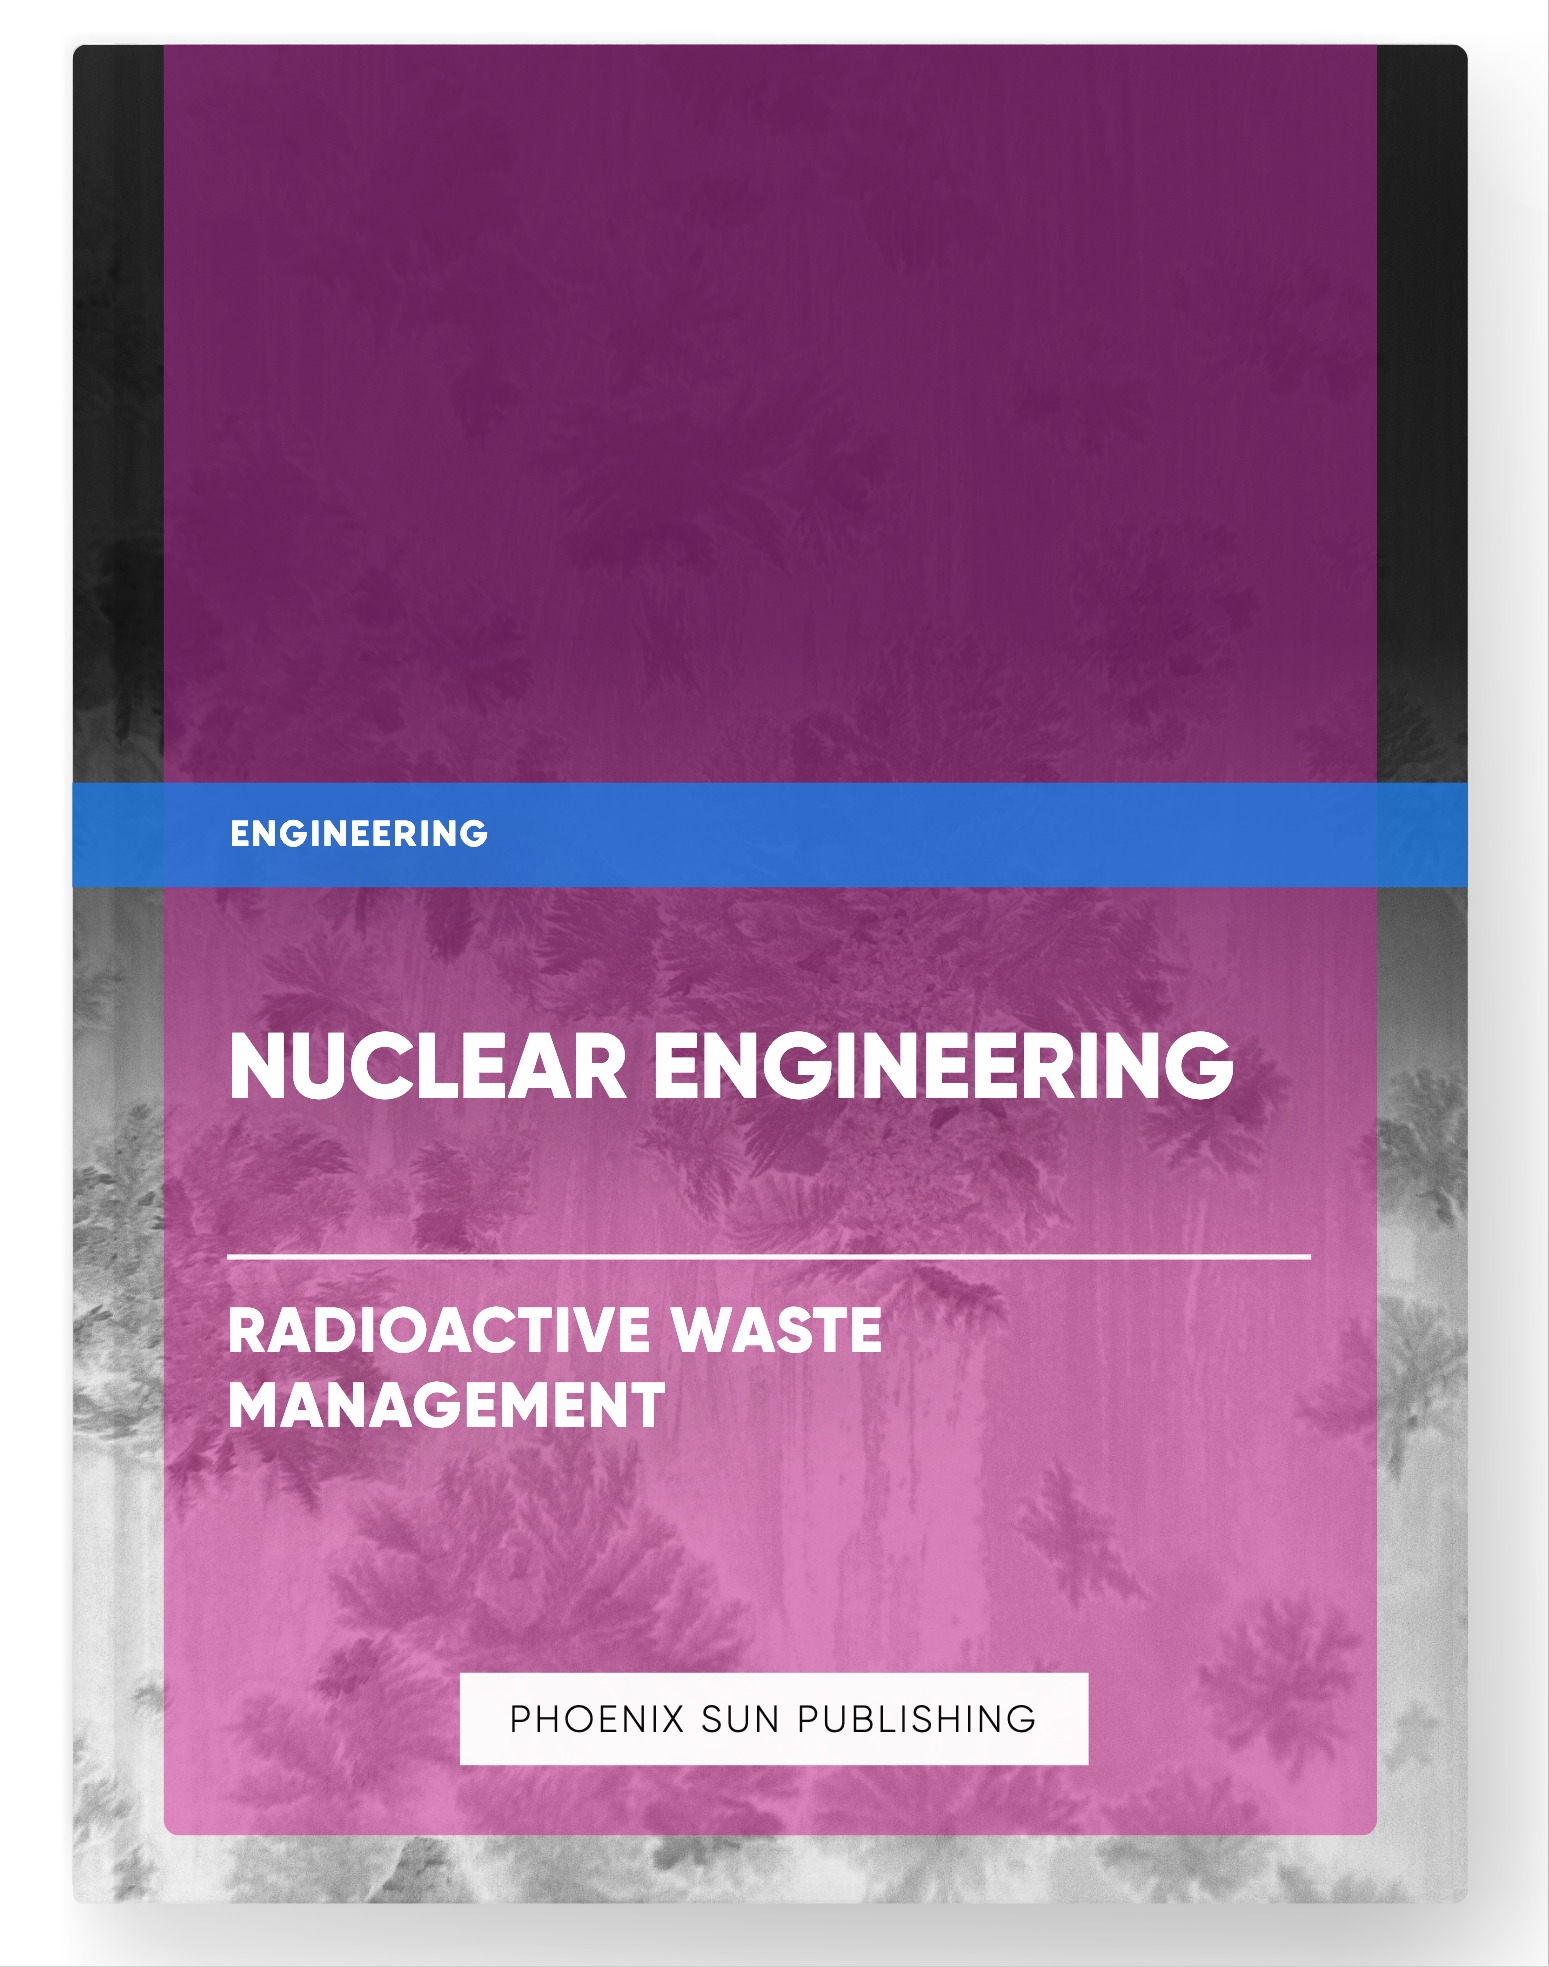 Nuclear Engineering – Radioactive Waste Management